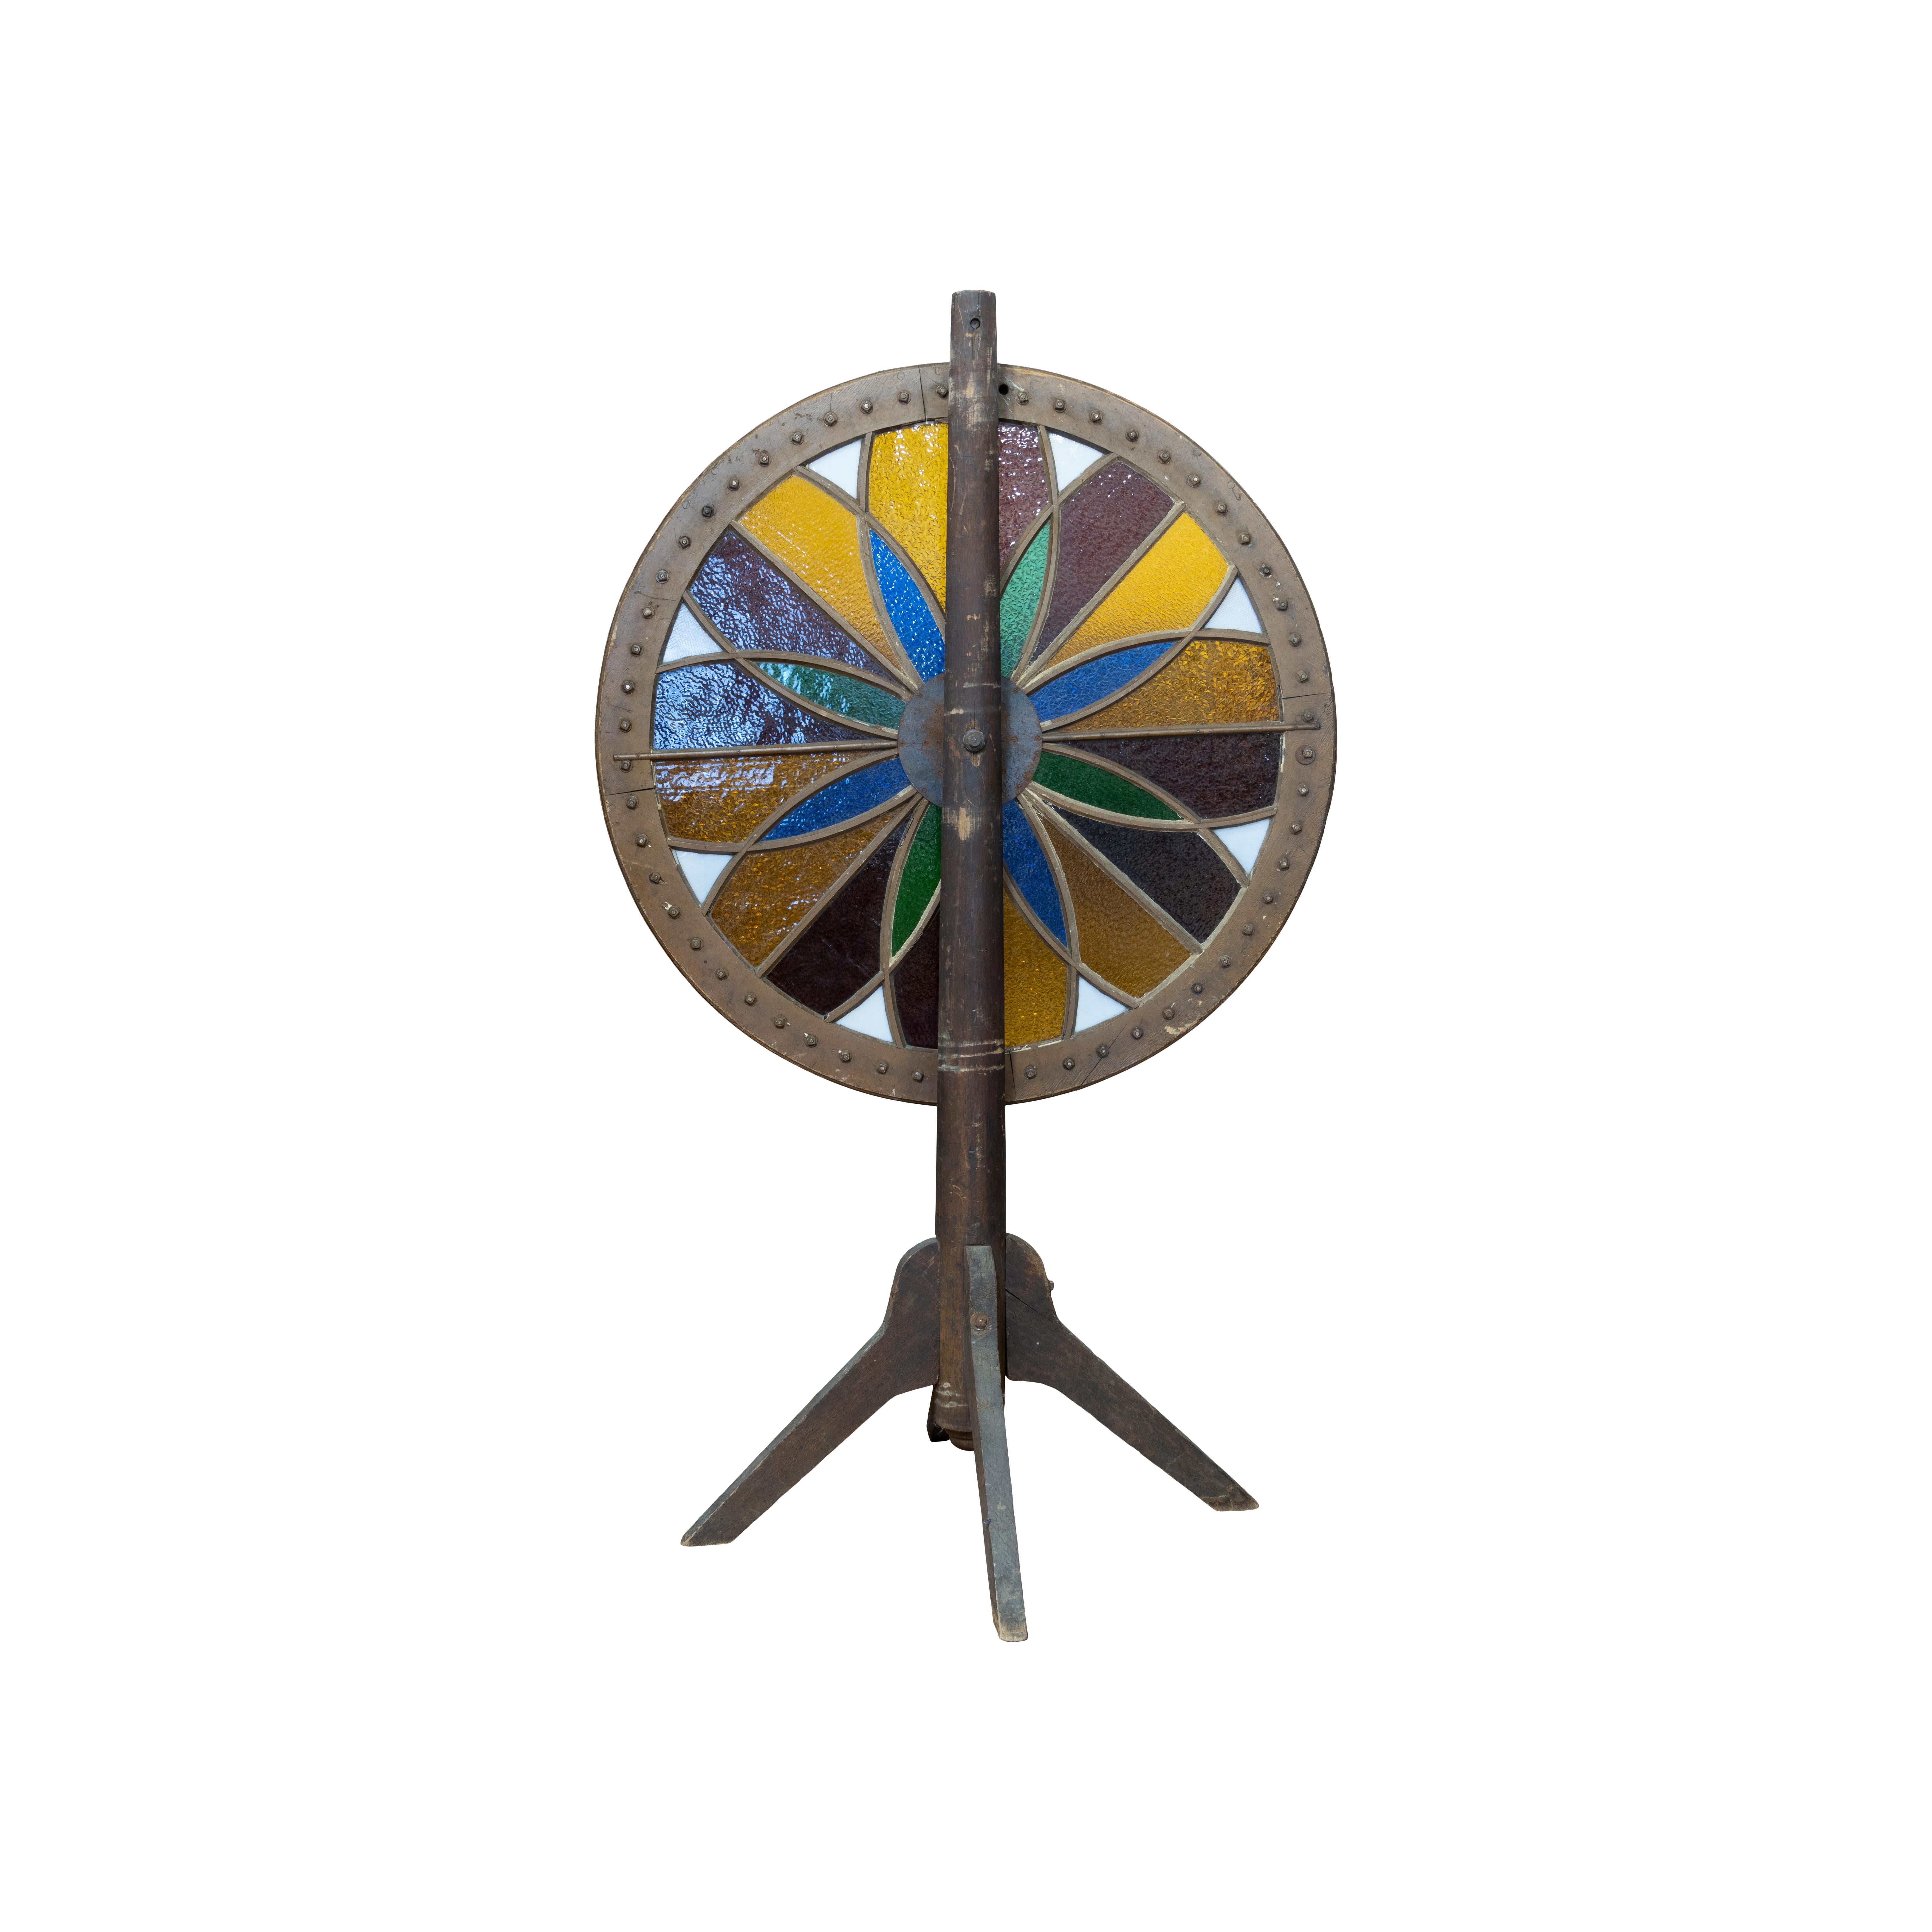 Vintage gambling wheel with colored glass. Three winner options - red, black or star. Came from a gambling house along the Mississippi River. Older than most. Perfect for bar, game room, gentleman's clubs, etc. Neat and hard to find. Great condition